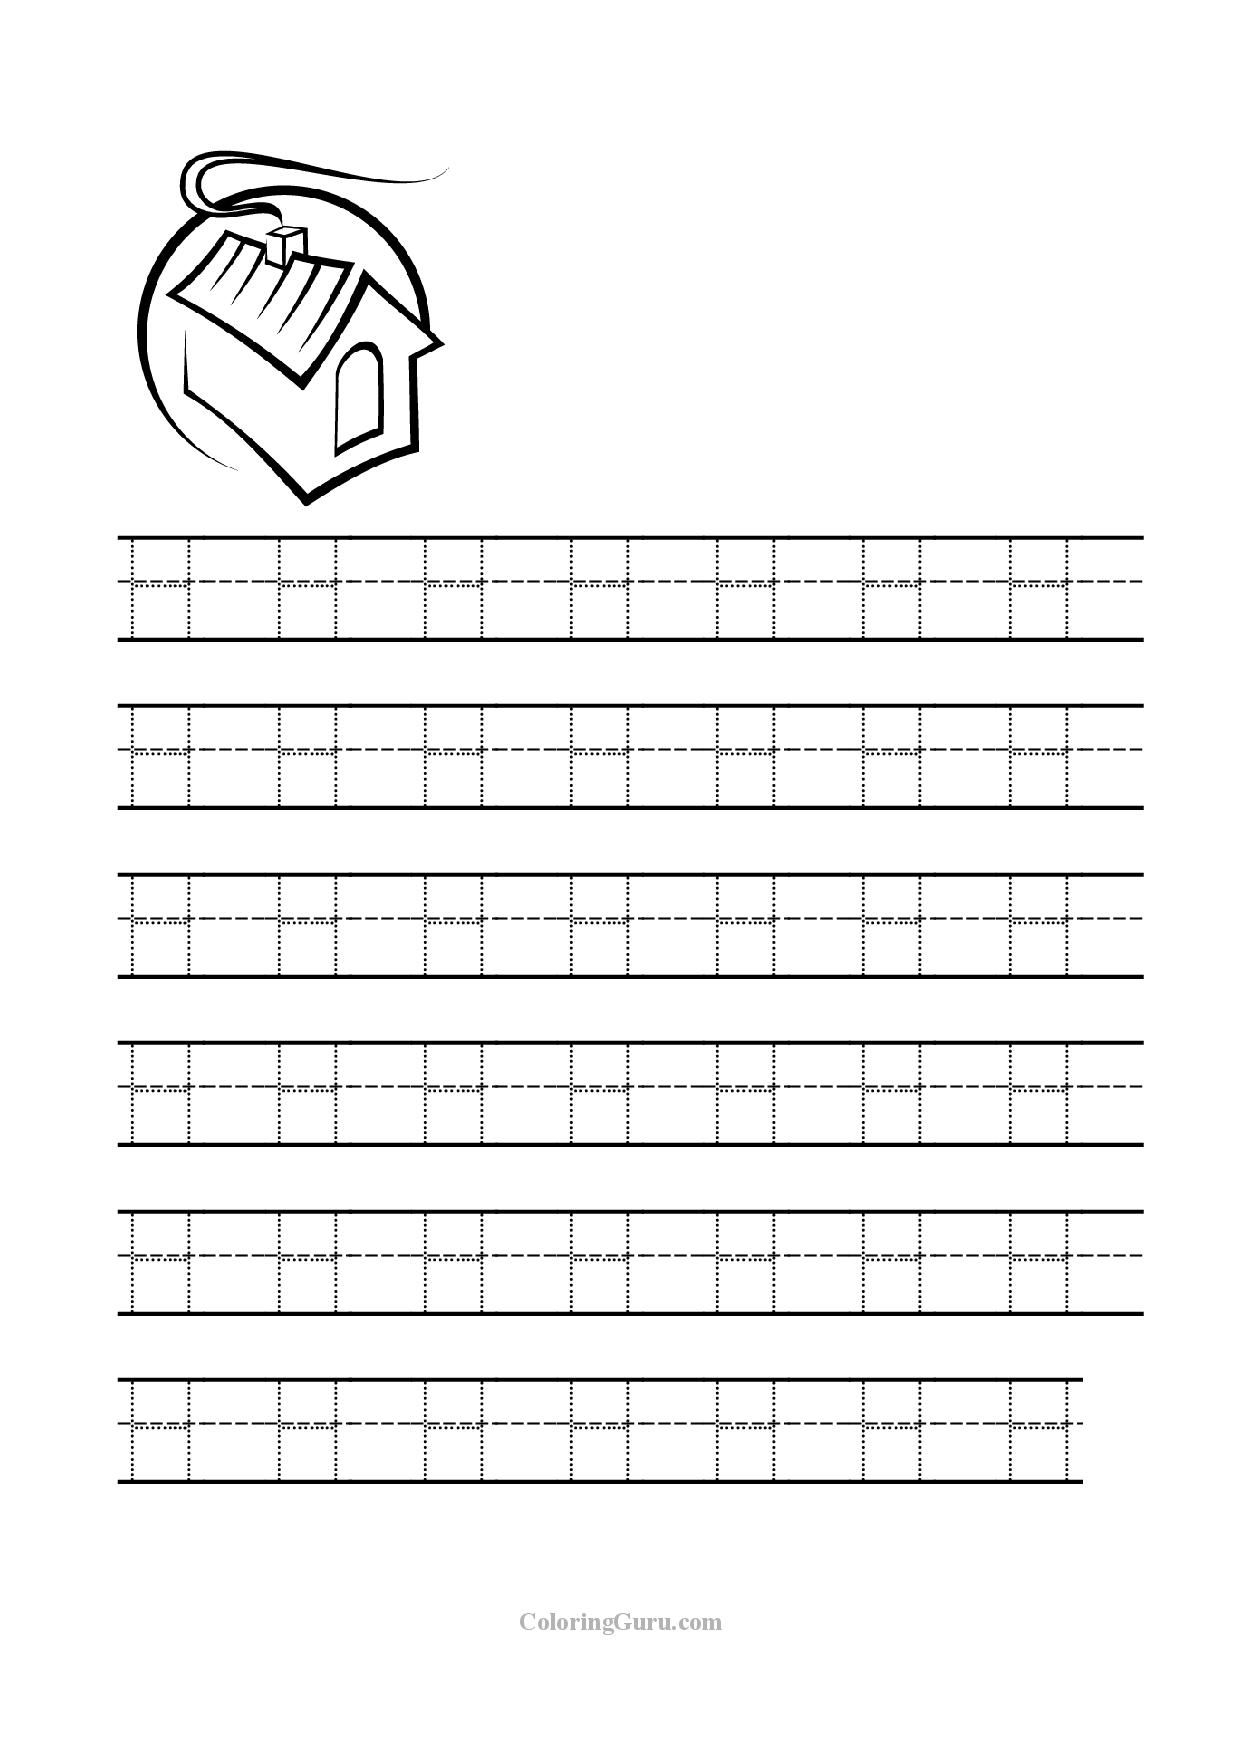 Free Printable Tracing Letter H Worksheets For Preschool within Letter H Worksheets Soft School